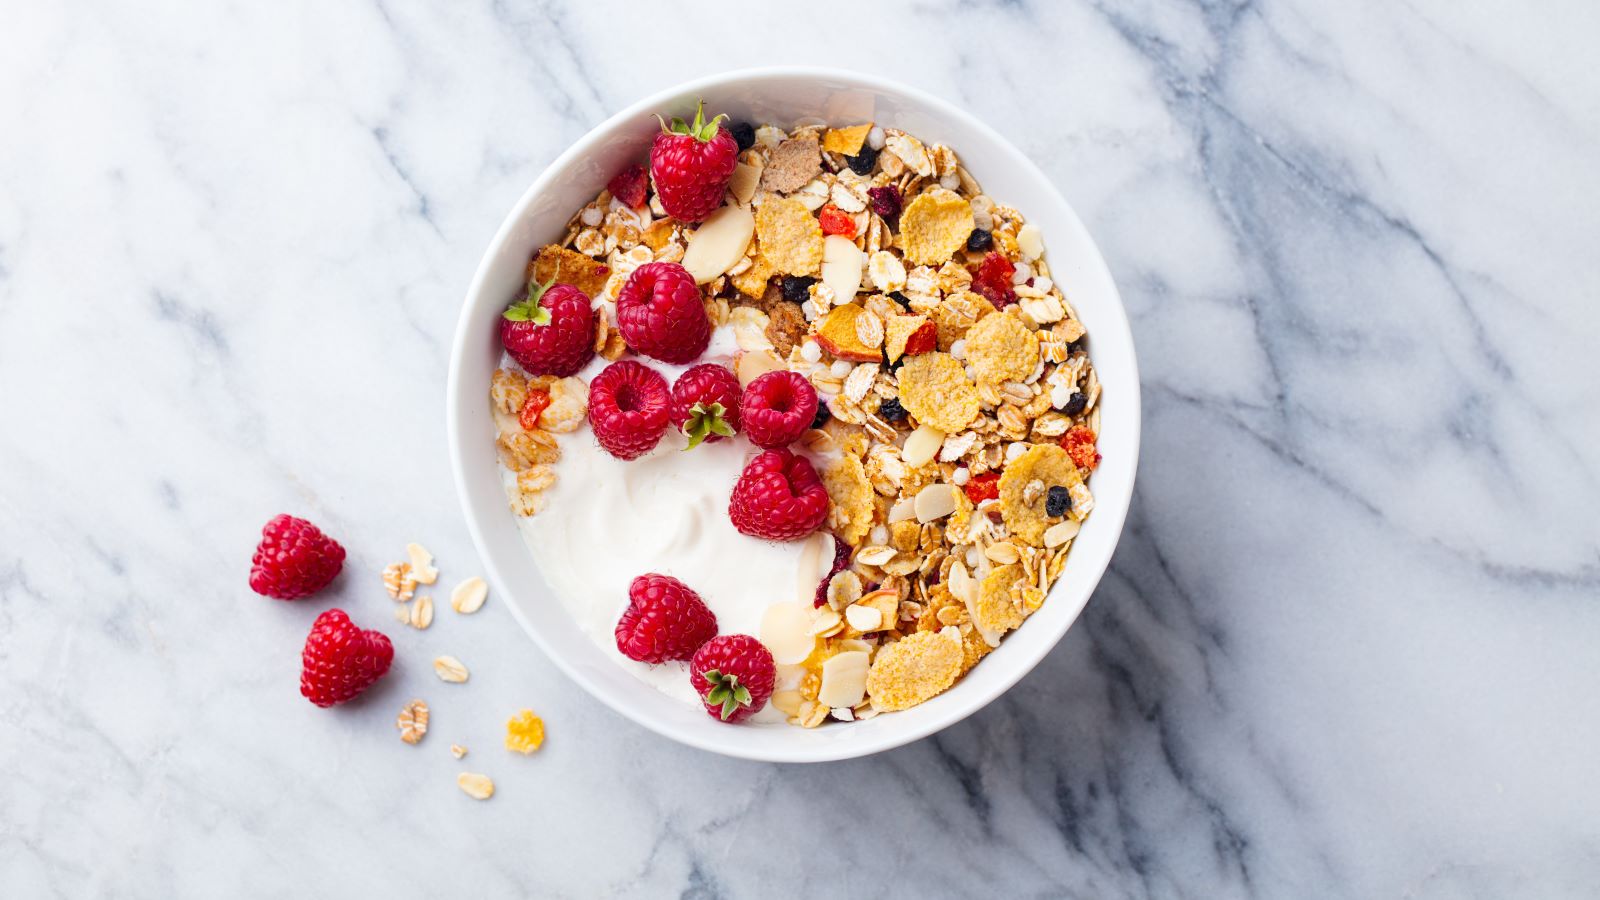 It’s a question as old as time – is cereal actually good for you? We asked a dietitian what you need to know about choosing a healthy cereal.